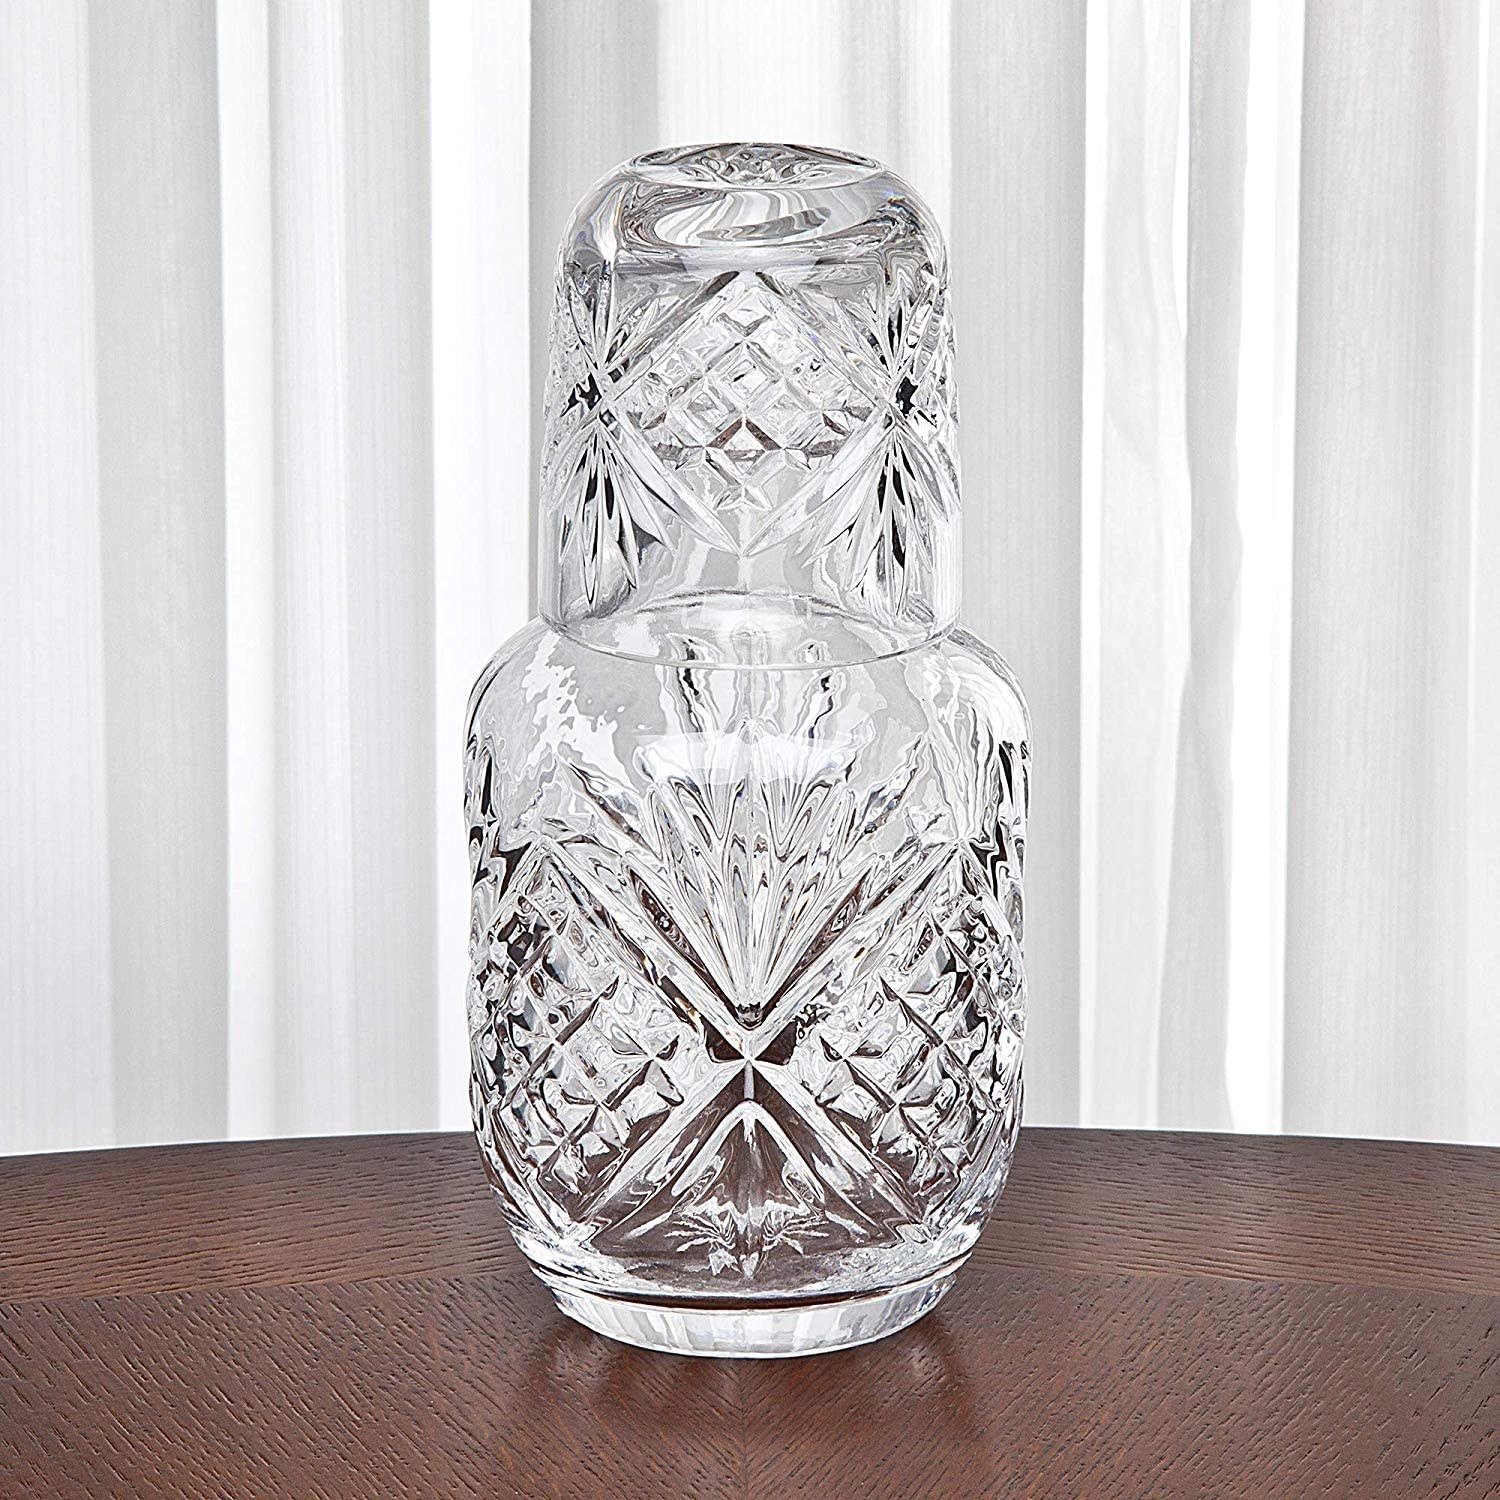 Crystal carafe on a wooden table